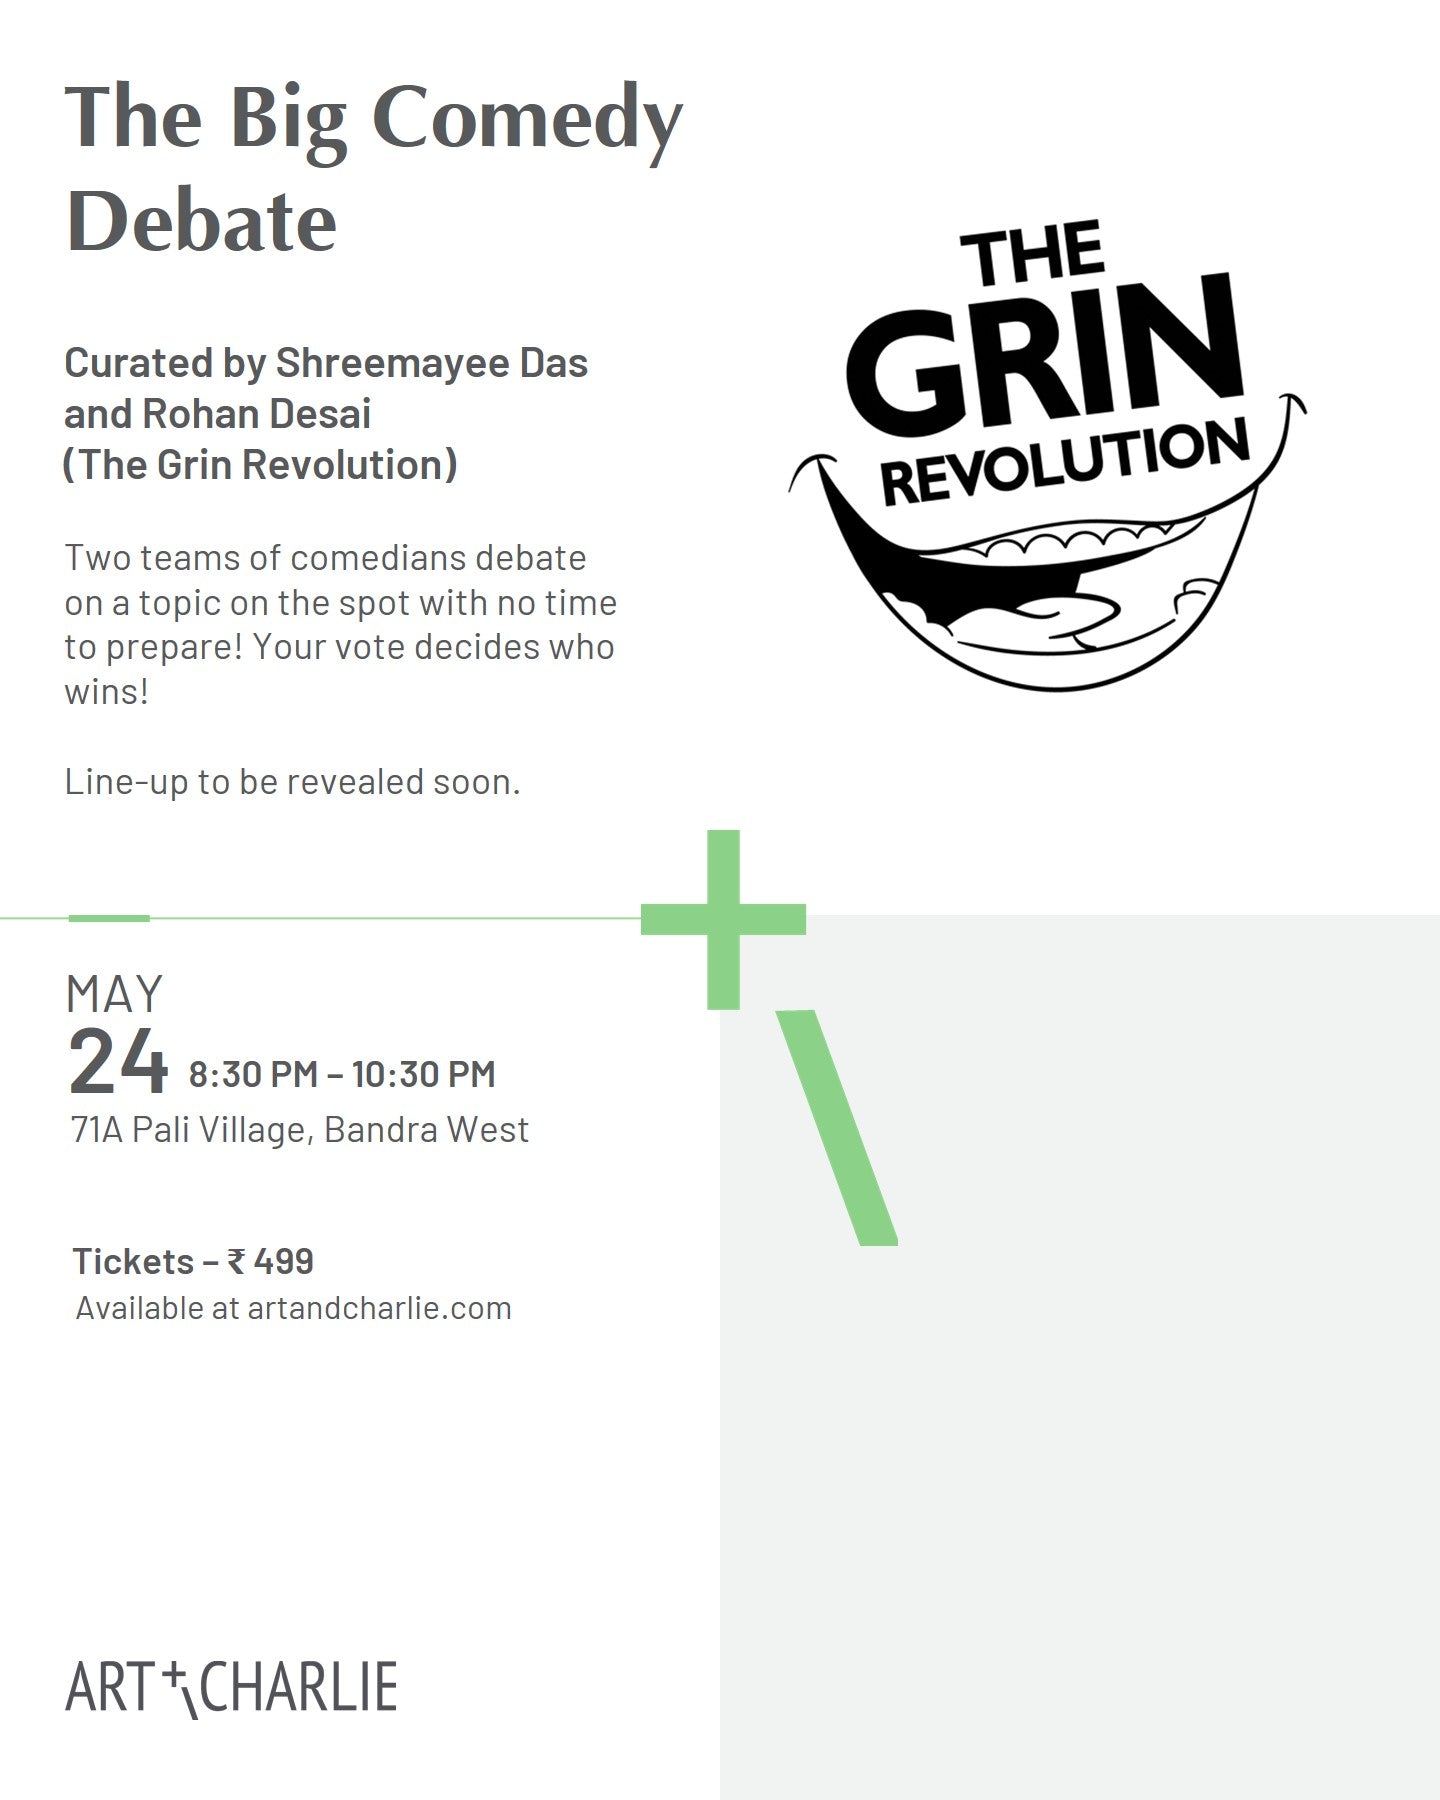 Ticket - The Big Comedy Debate - 24 May - 8:30 PM